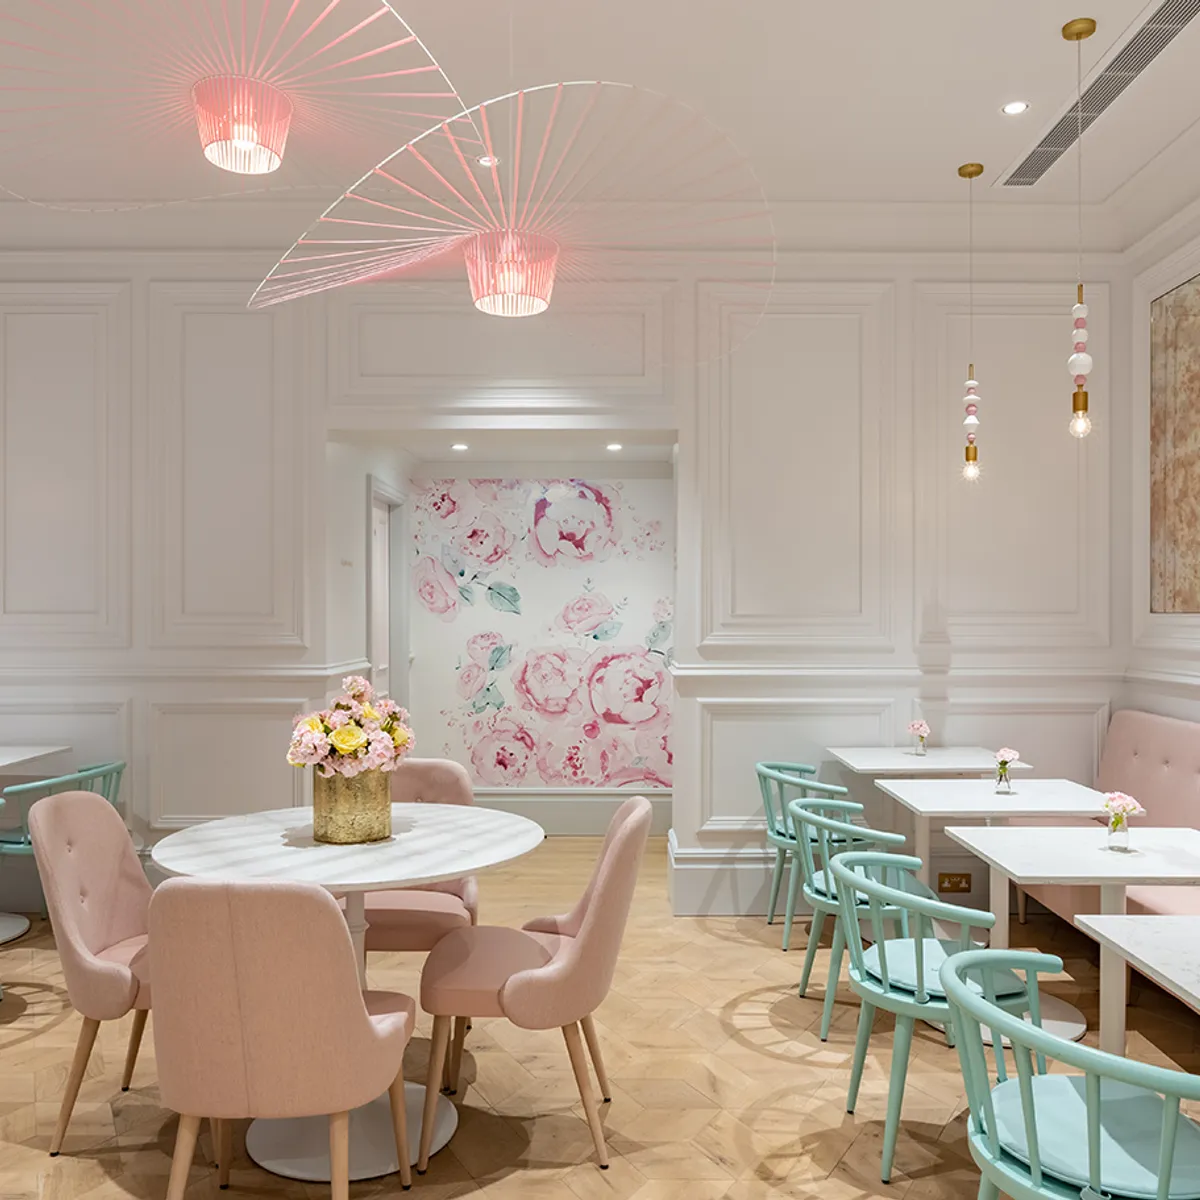 Peggy Porschen Chelsea Photo By Tom Bird 2 Furniture For Commercial Interiors By Insideoutcontracts